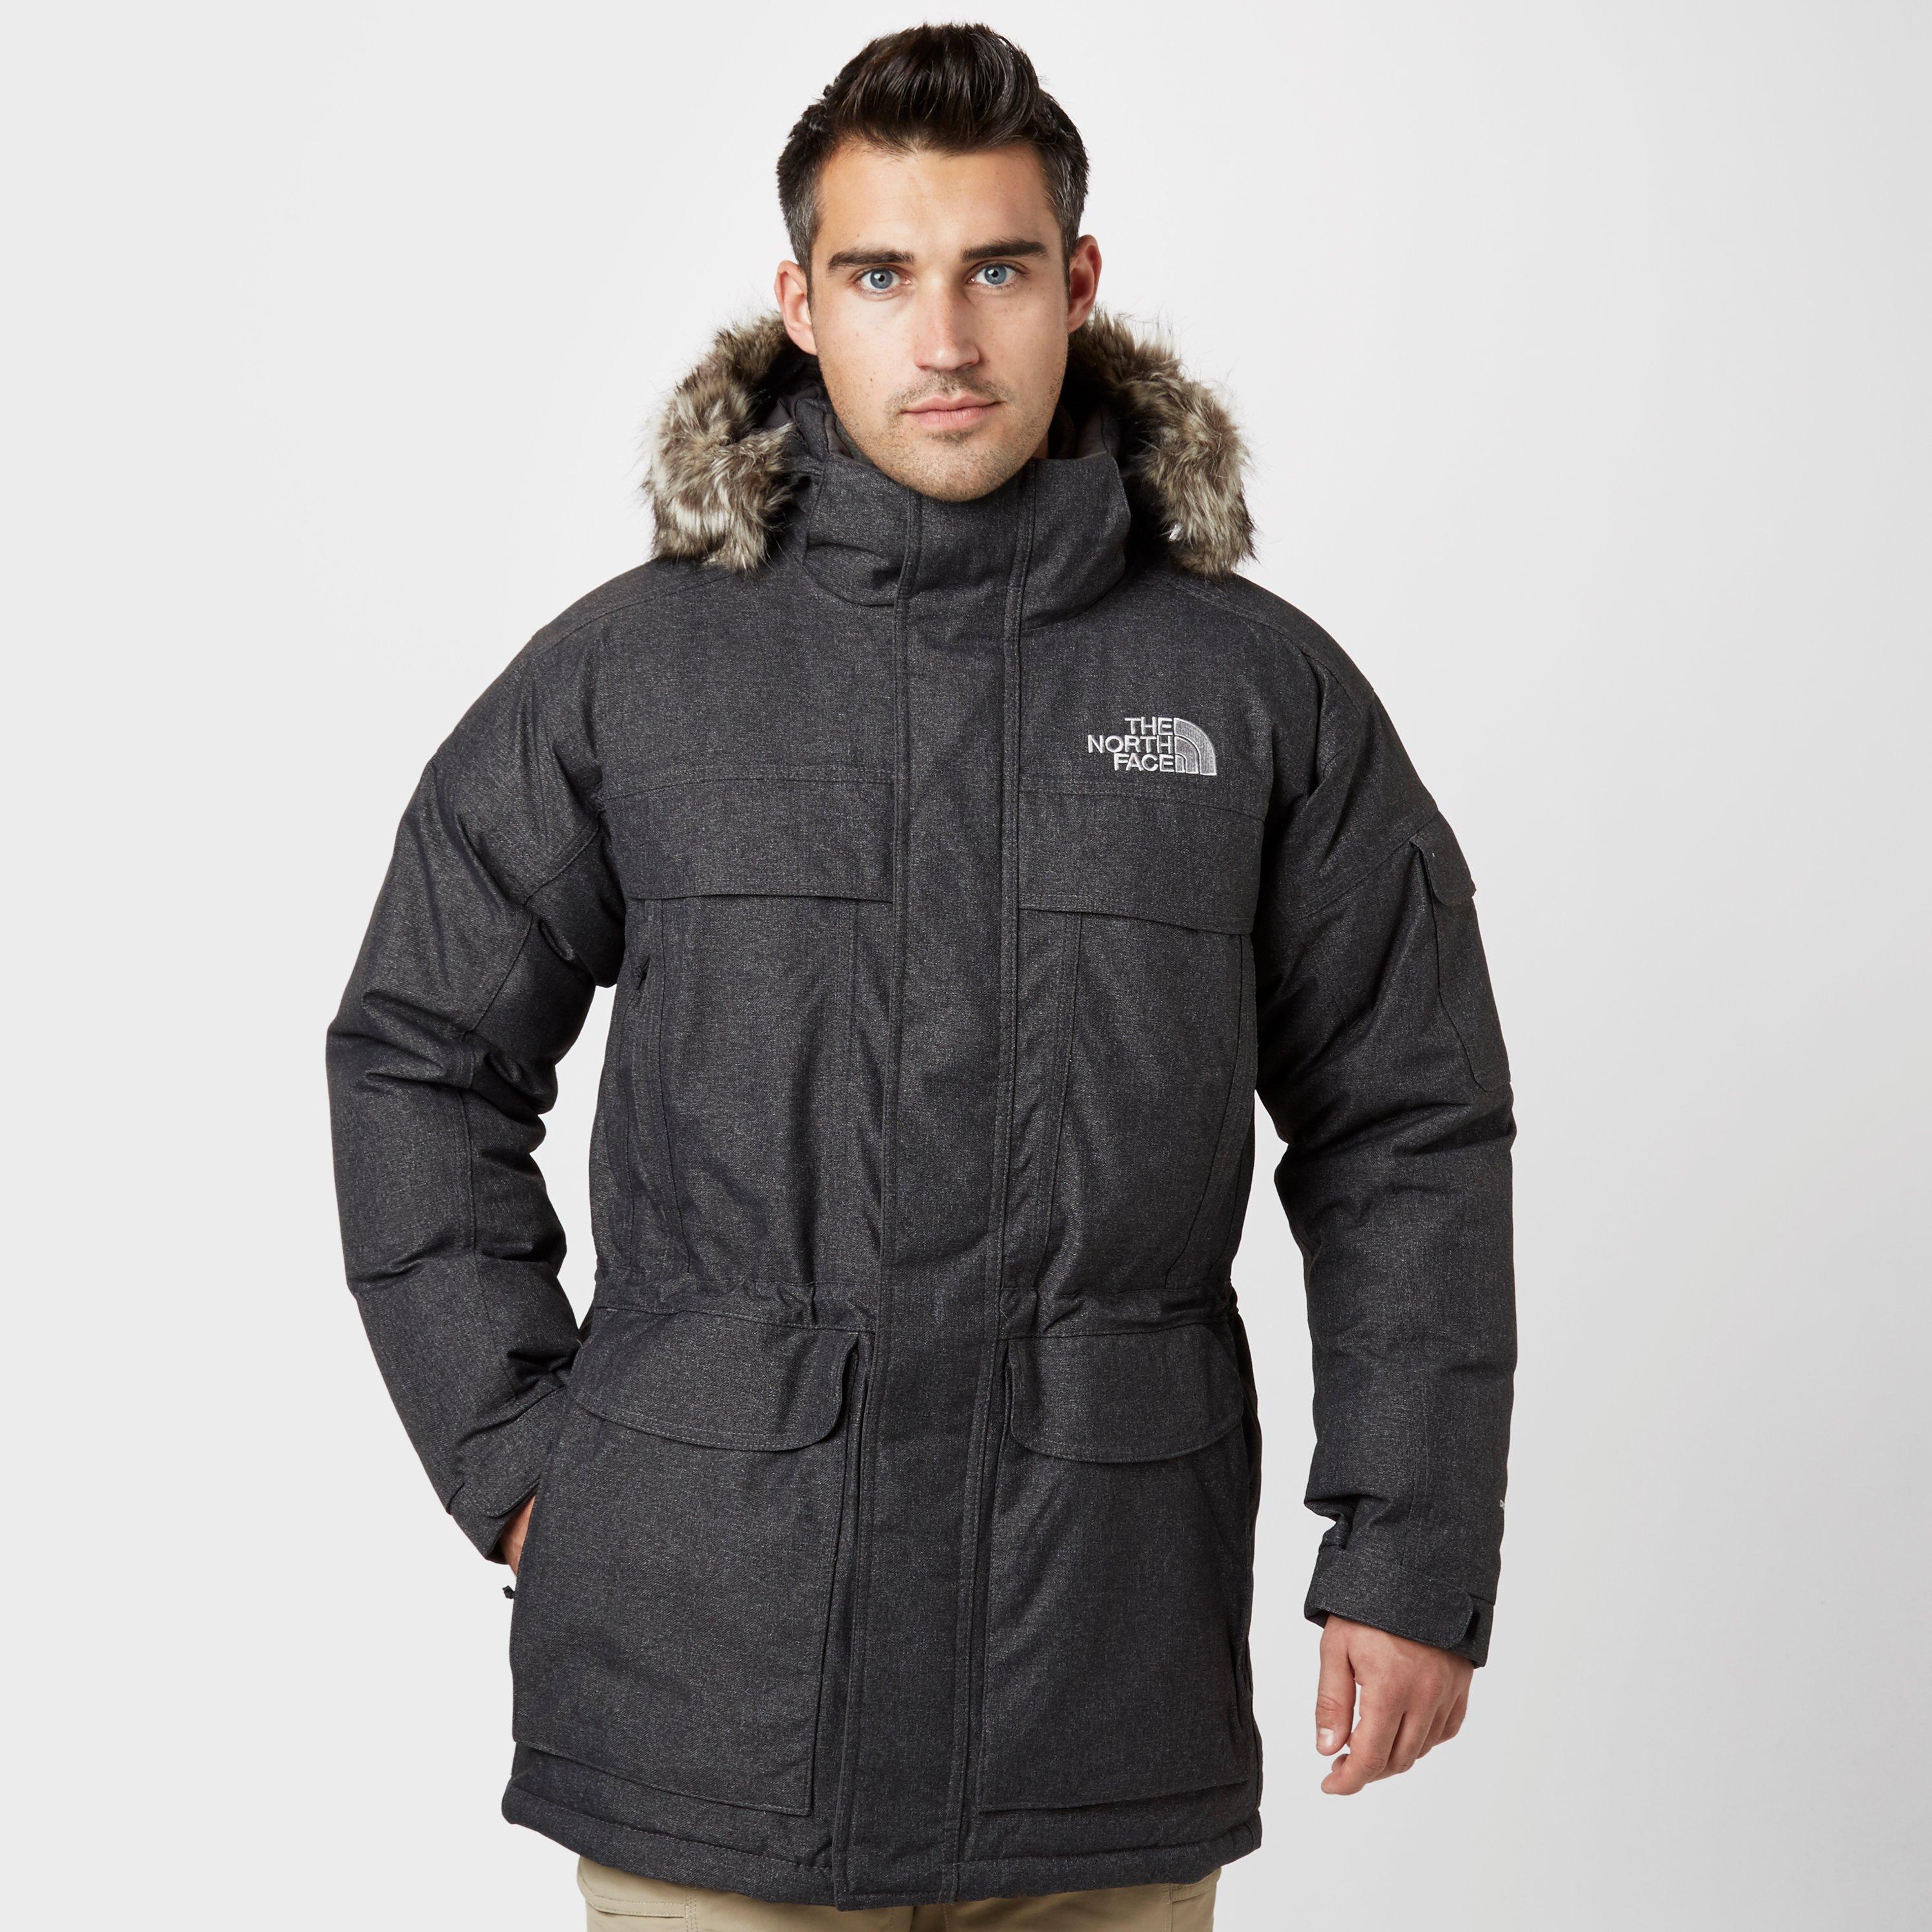 mens north face down jacket with fur hood - jackets in my home